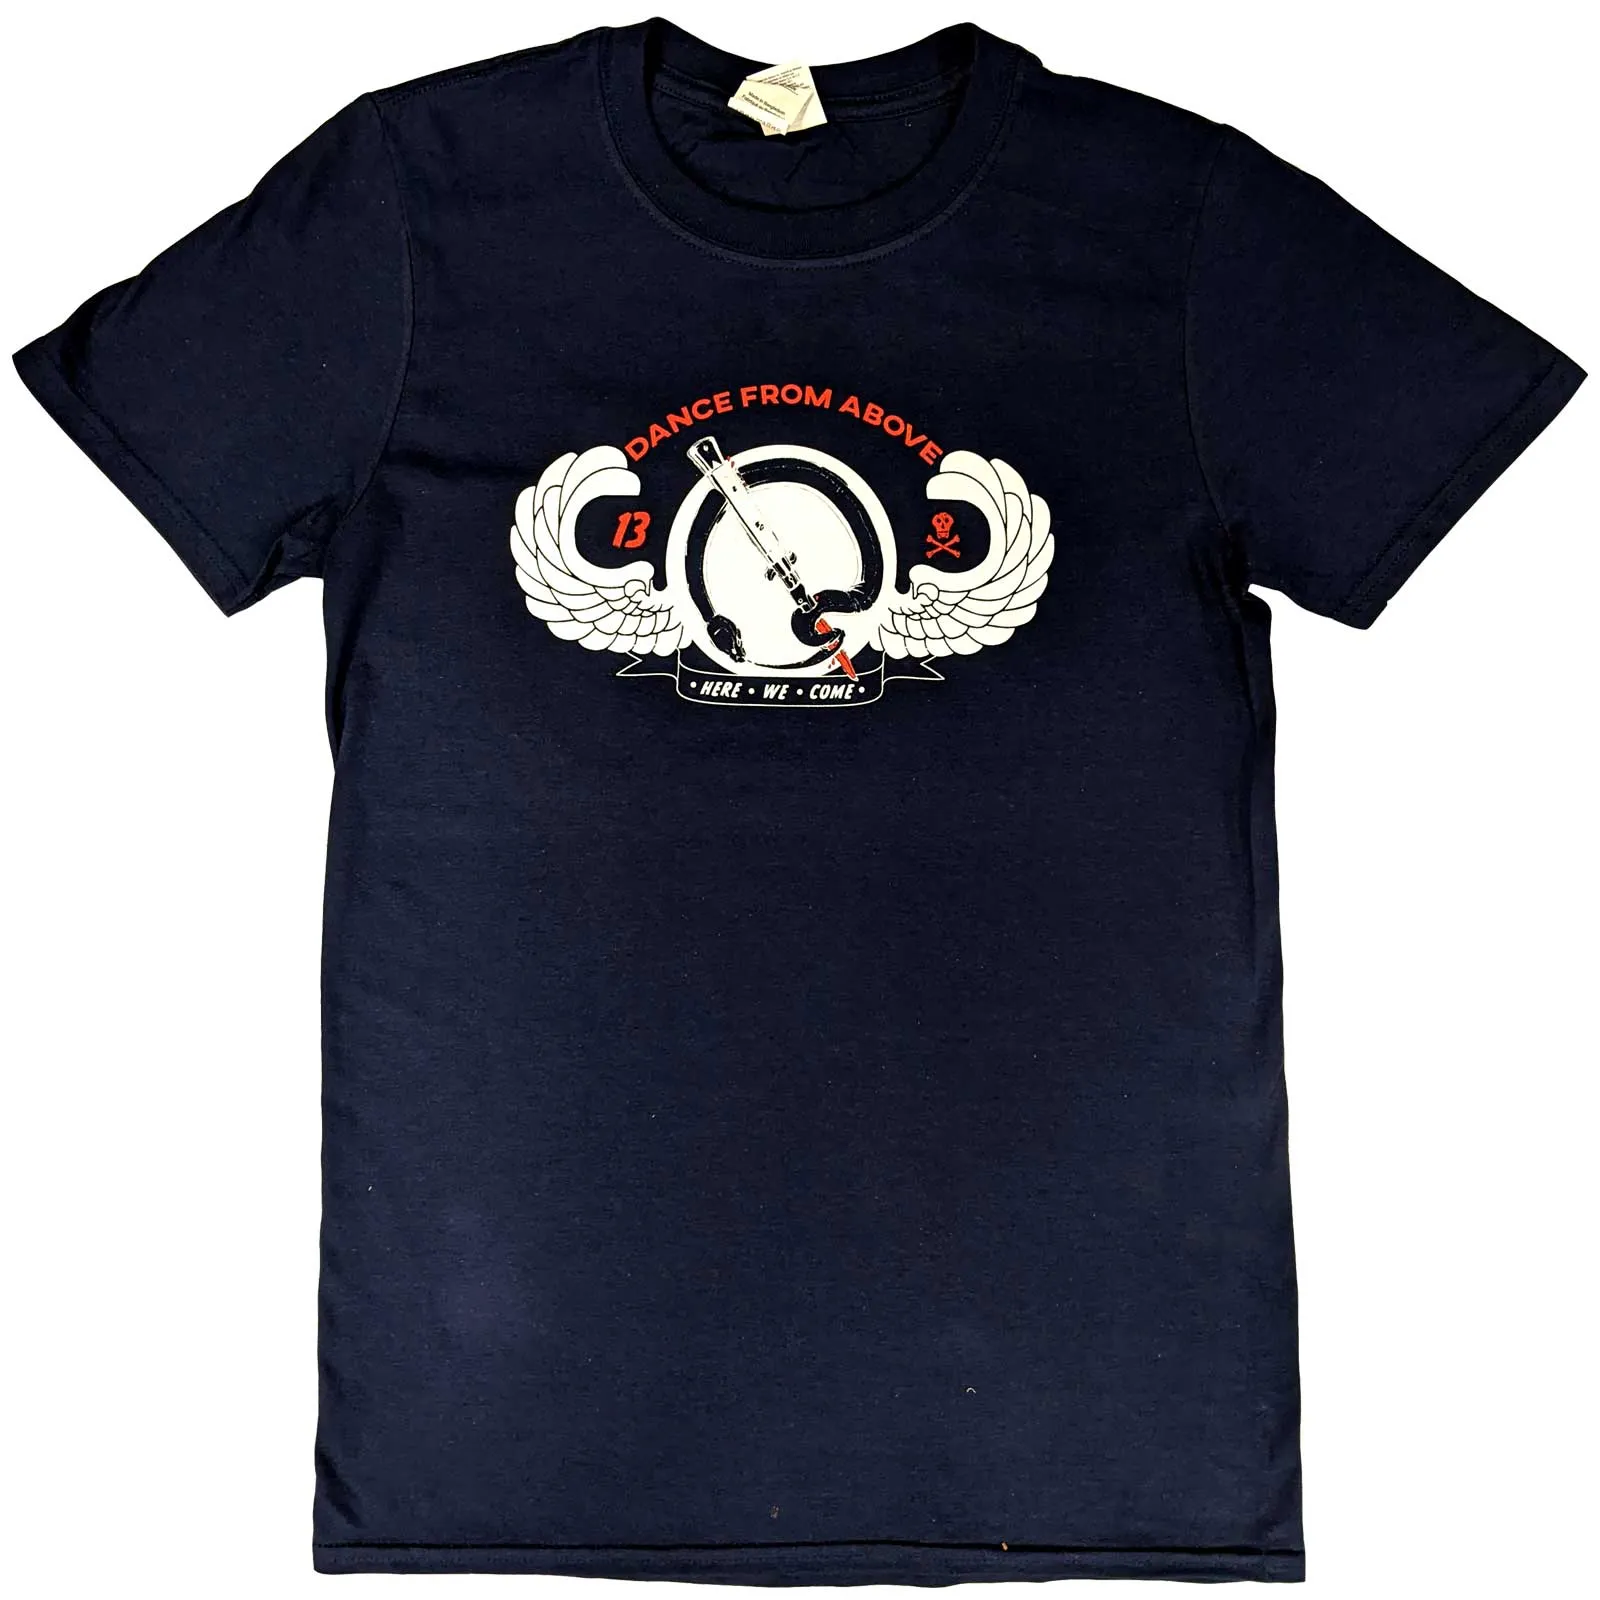 Queens Of The Stone Age - Unisex T-Shirt Dance From Above artwork